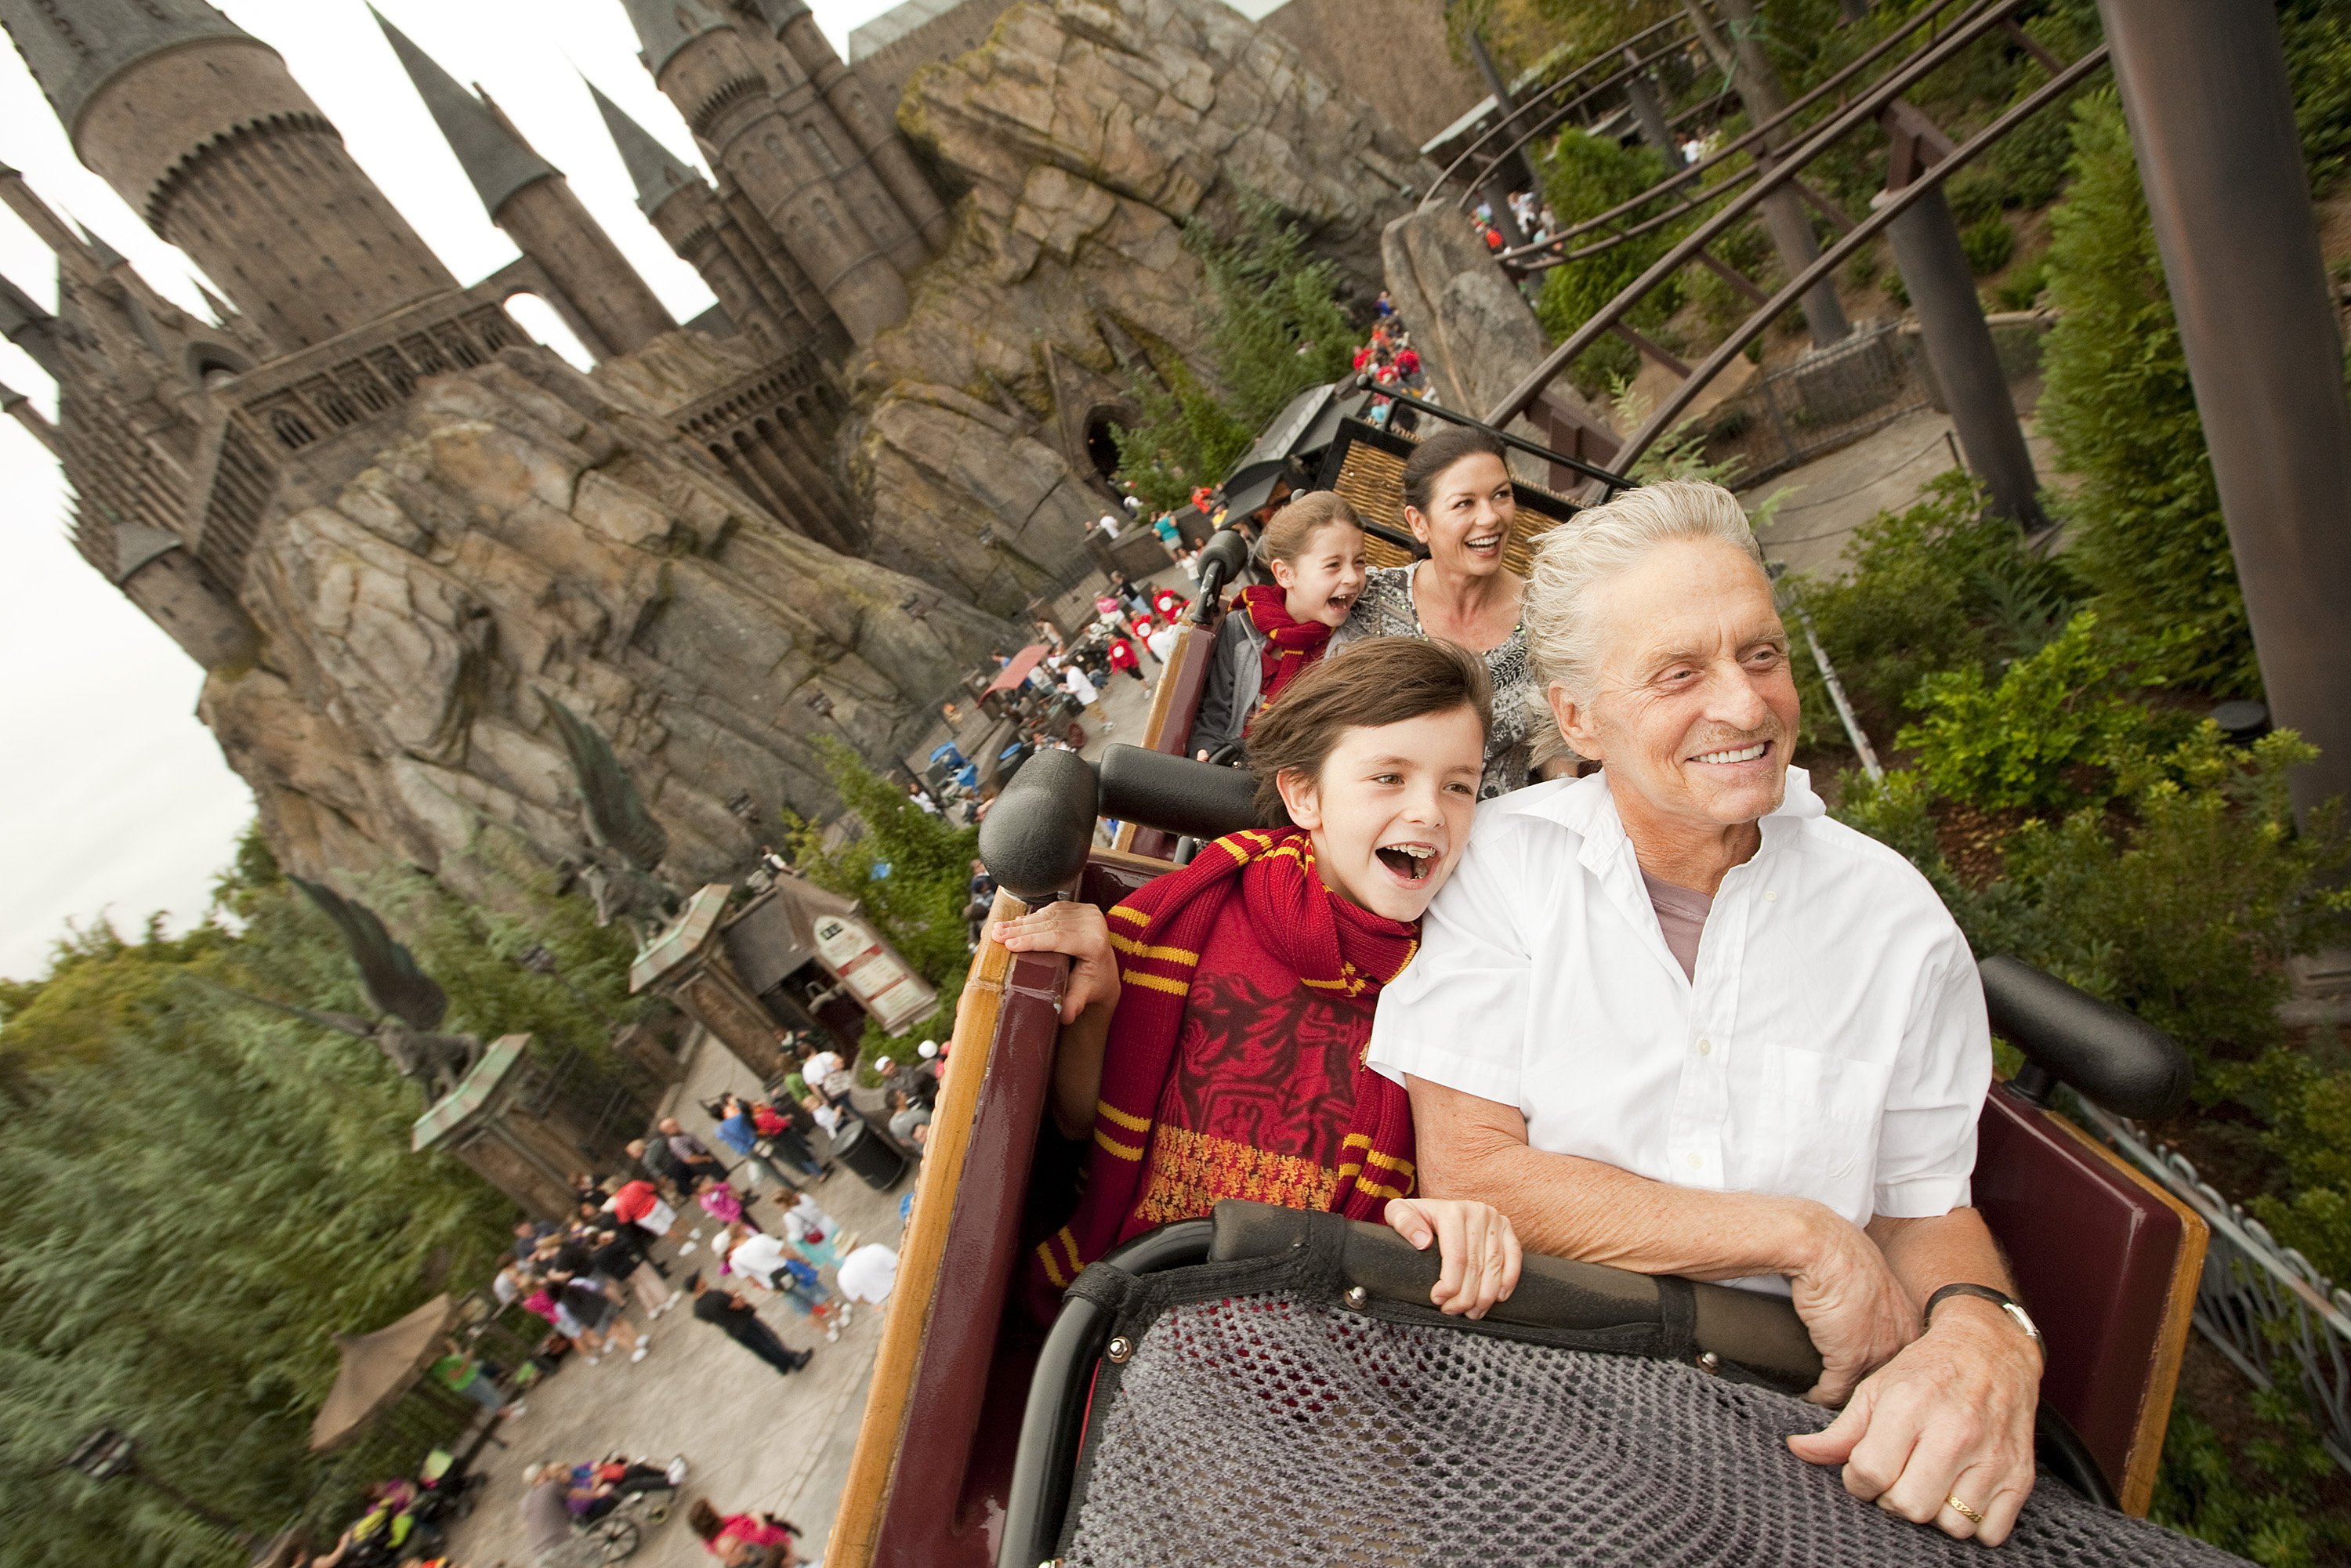 Michael Douglas and Catherine Zeta-Jones, along with their children Dylan, 10, and Carys, 7, fly over The Wizarding World of Harry Potter and past Hogwarts Castle while riding Flight of the Hippogriff at Universal Orlando Resort on November 27, 2010, in Orlando, Florida. | Source: Getty Images